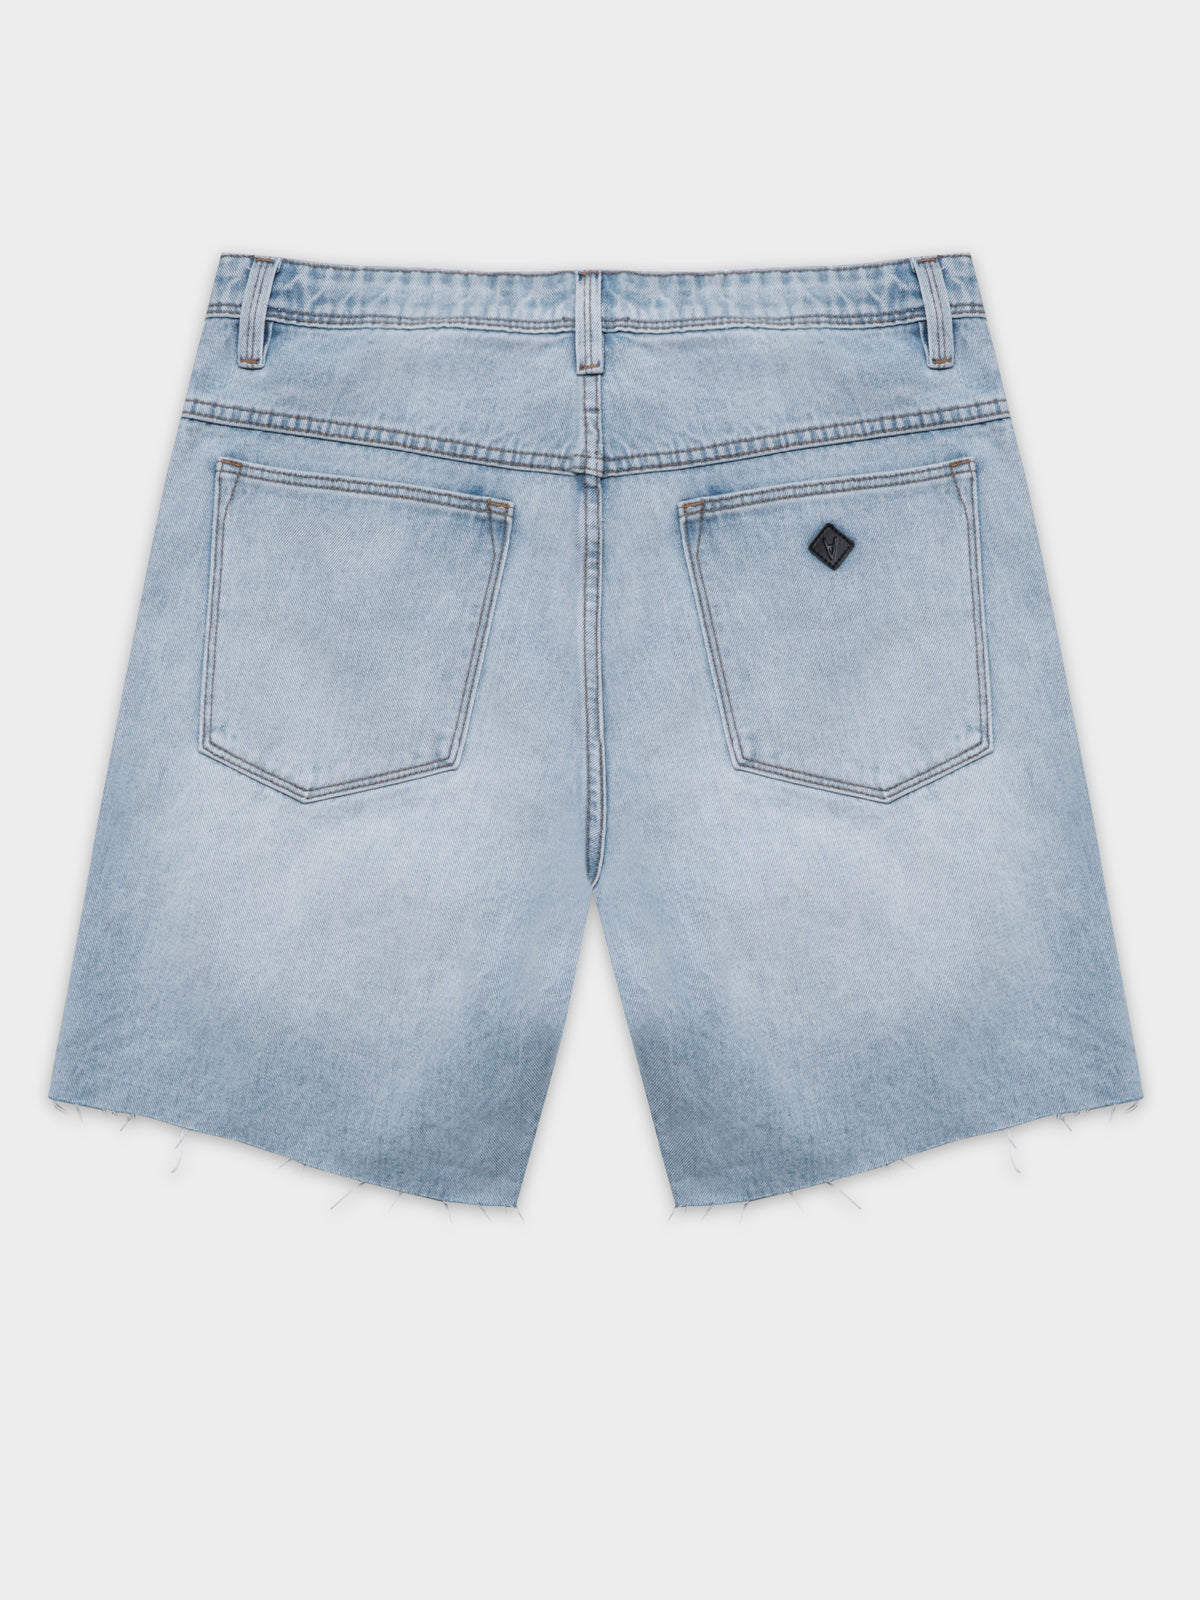 A 90s Straight Shorts in Ice Blue